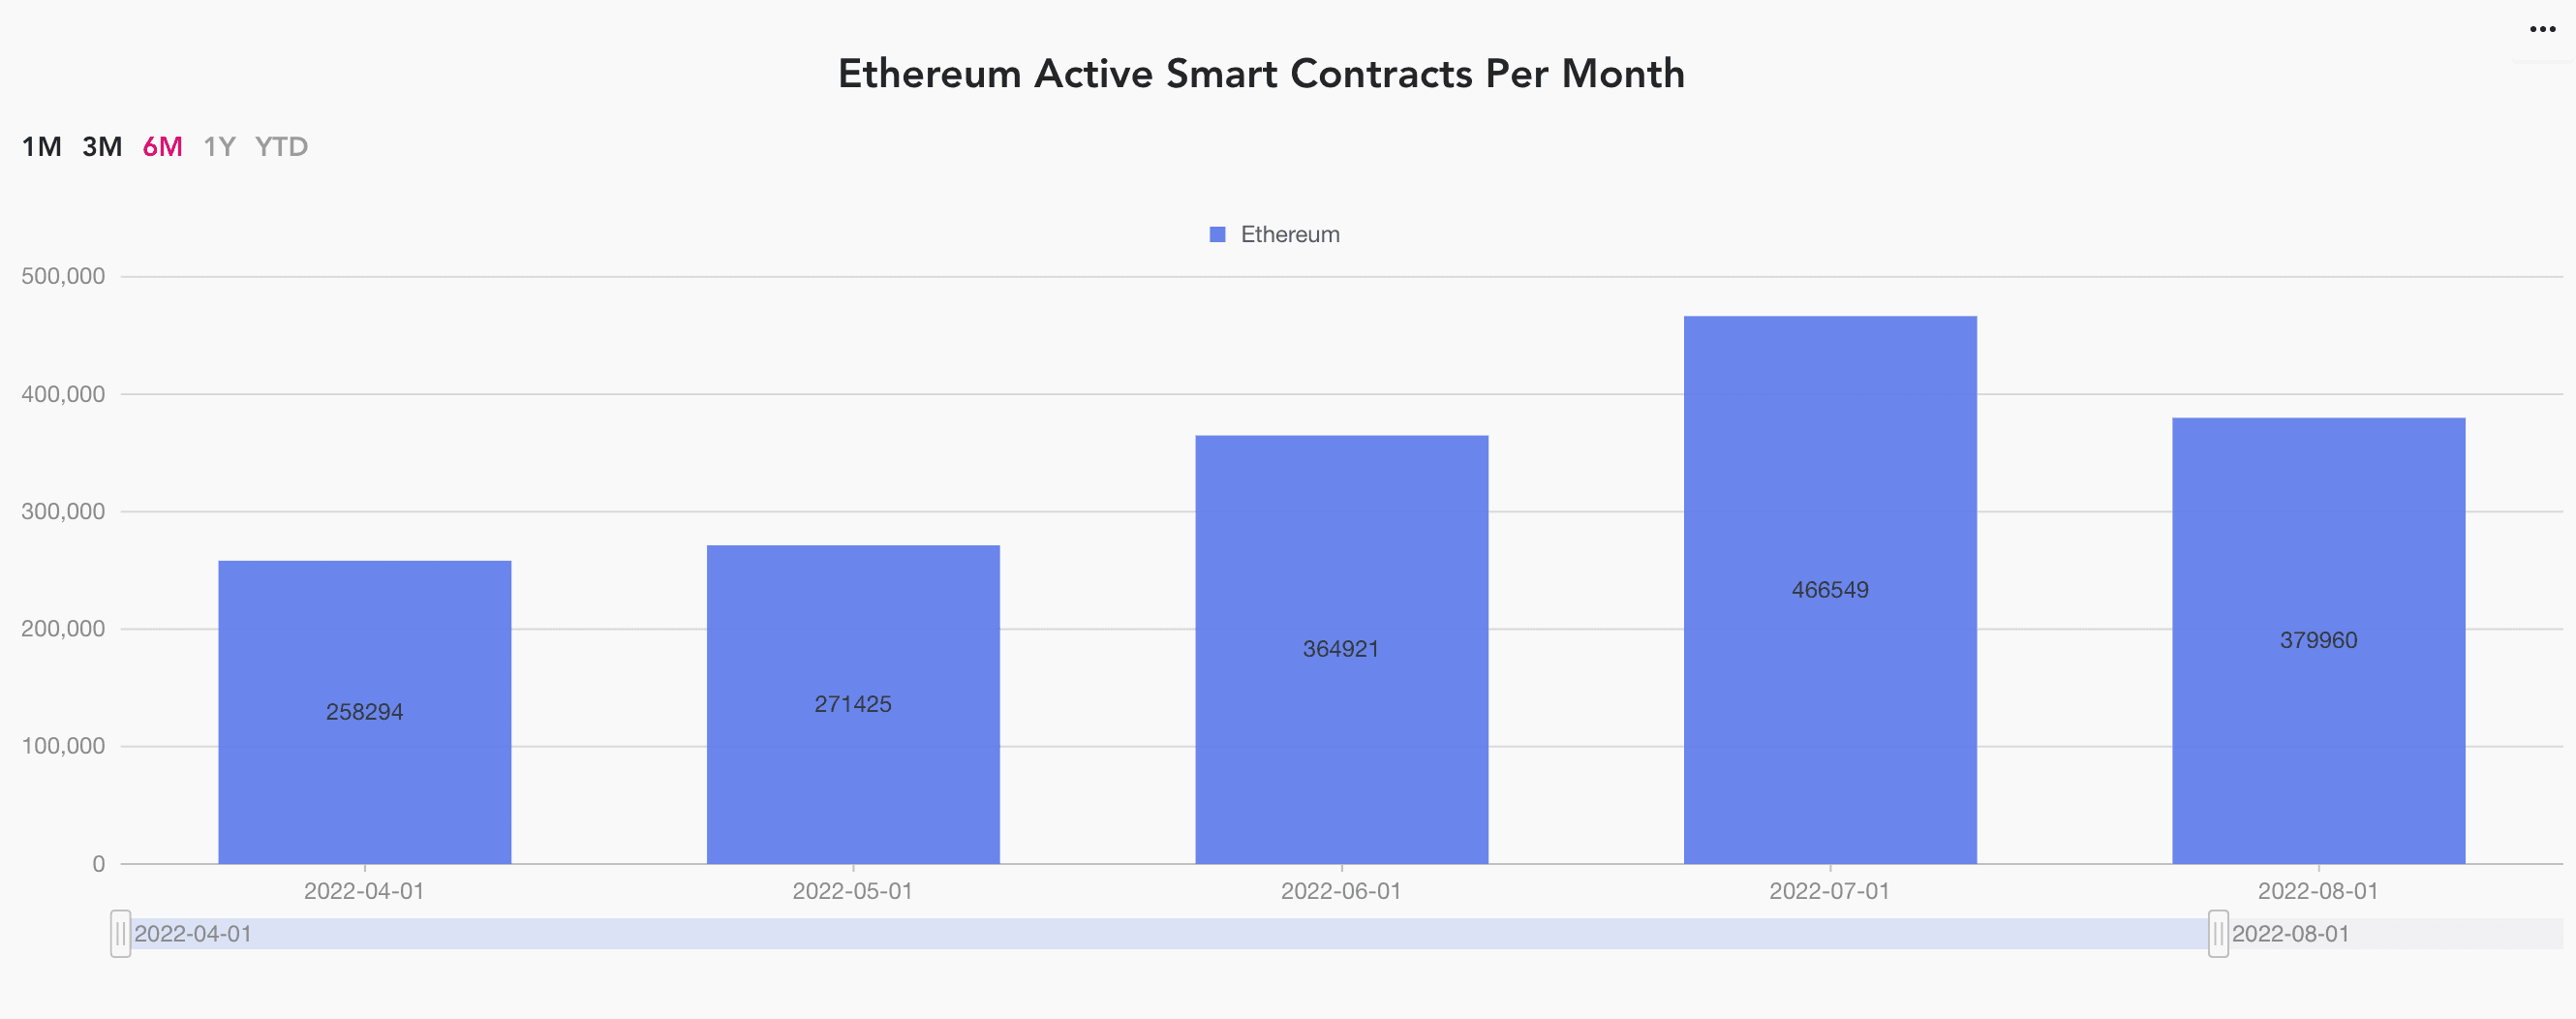 ethereum active smart contracts per month